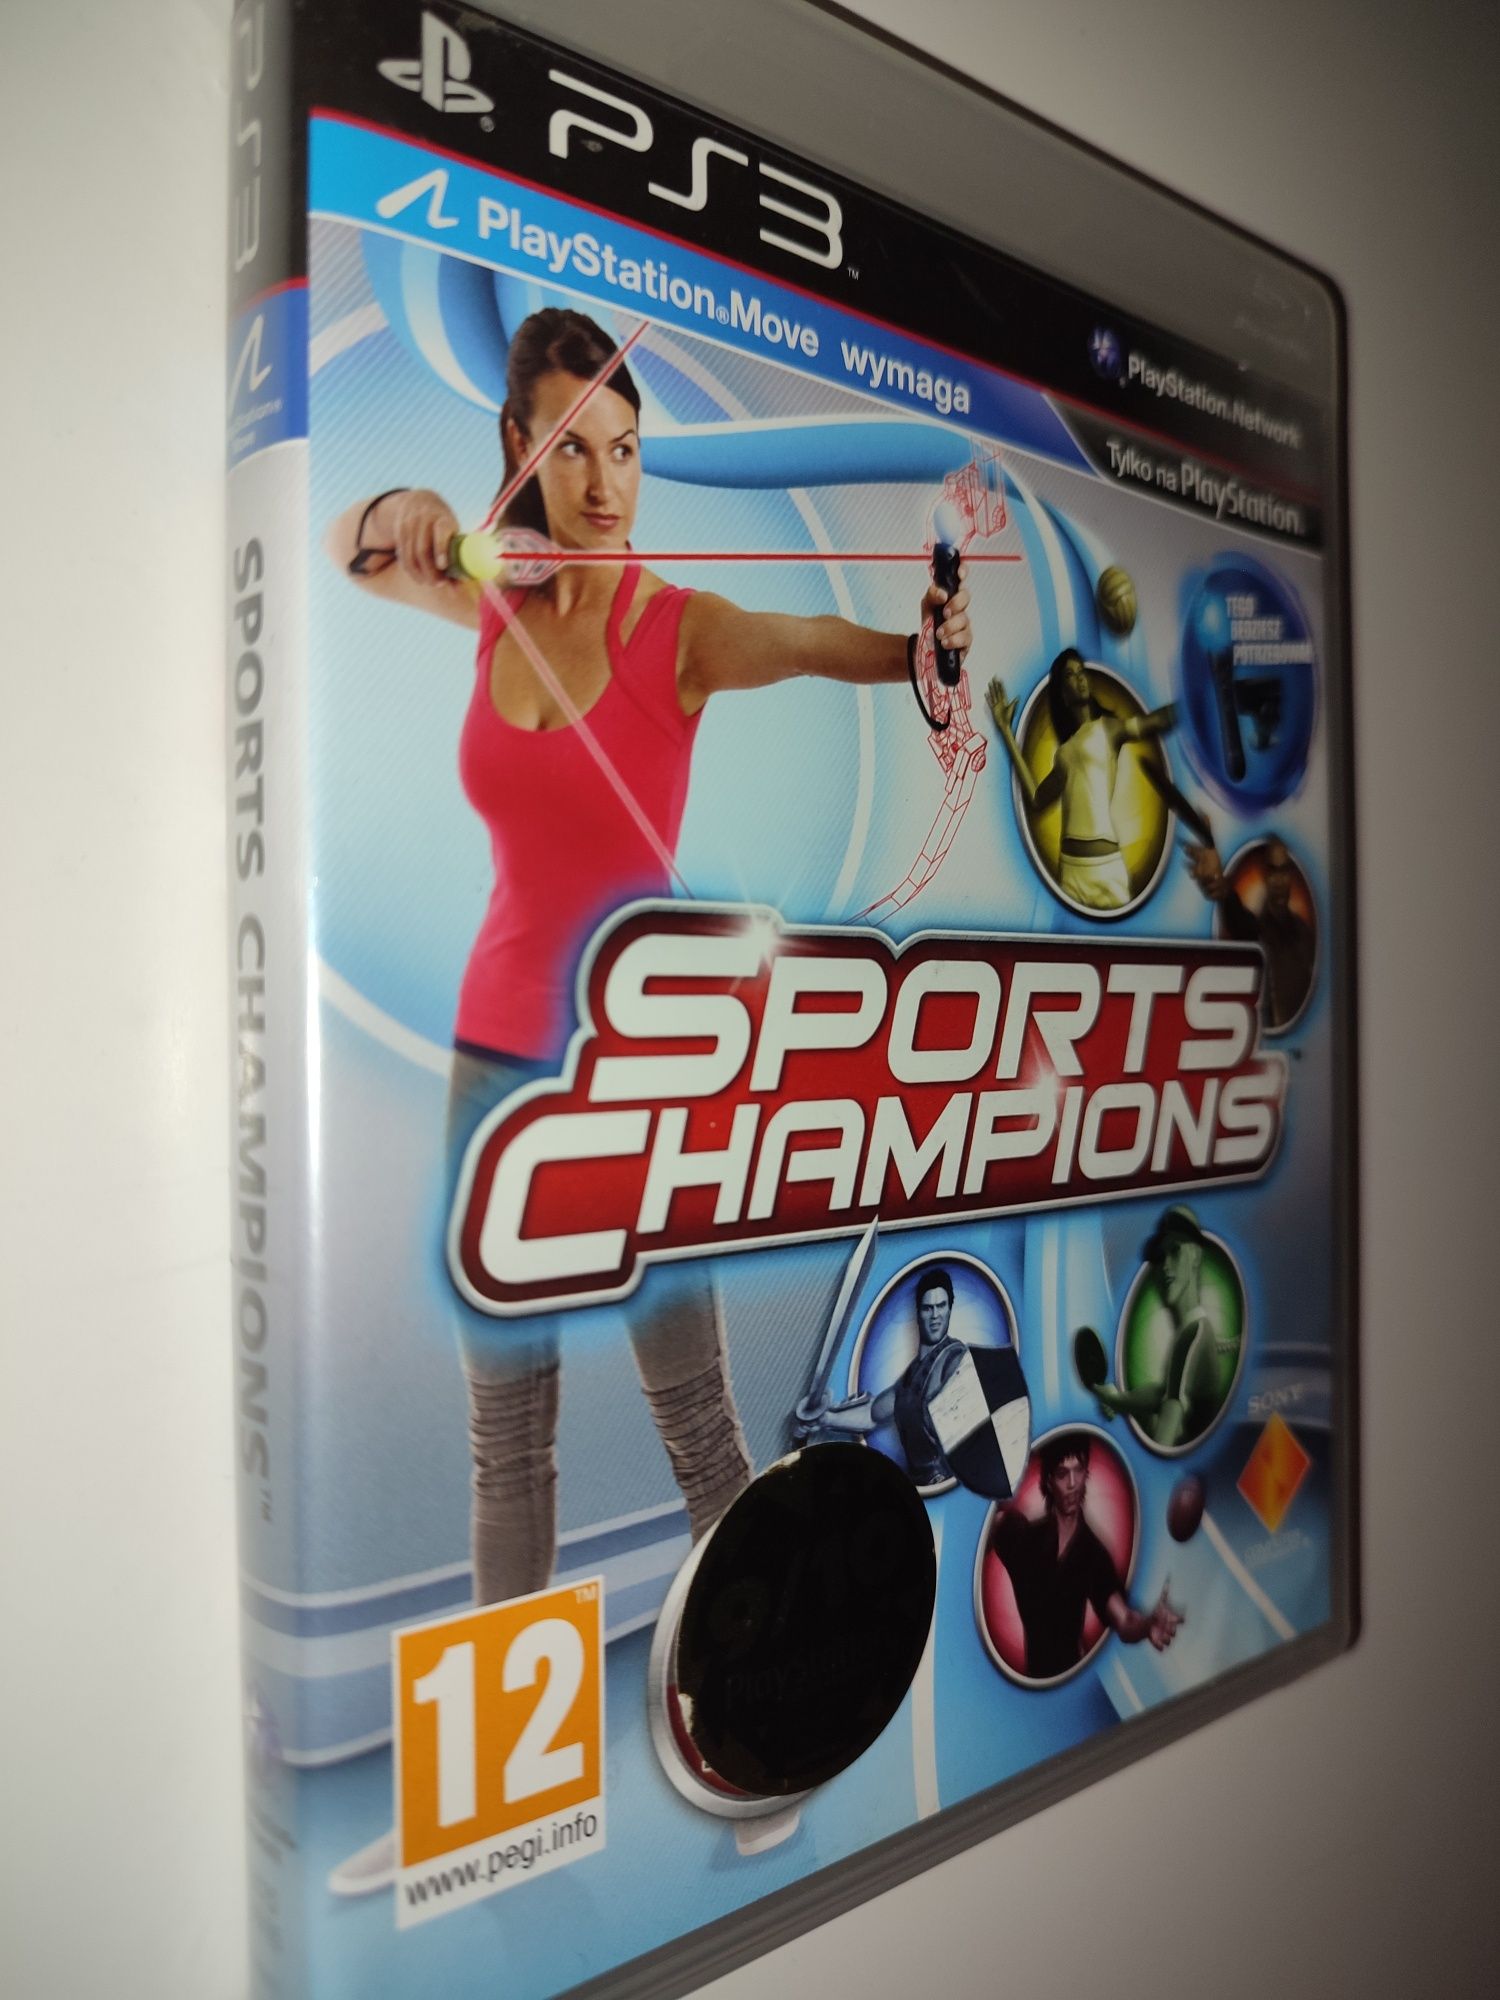 Gra Ps3 Sports Champions move Edition gry PlayStation 3 Hit